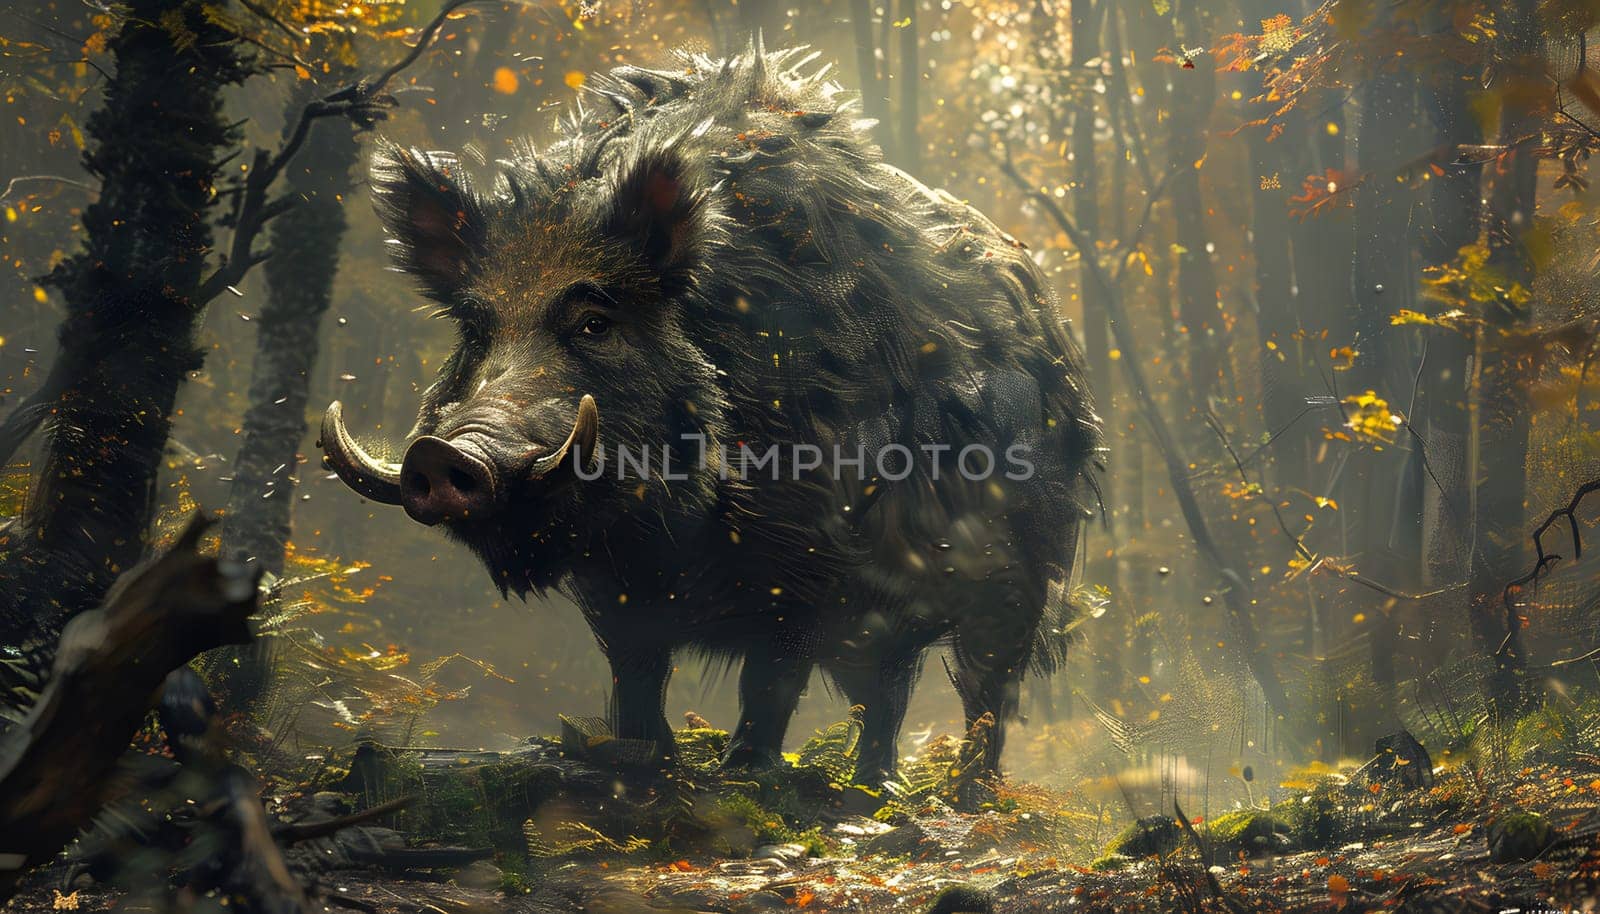 A terrestrial carnivore with a snout, a wild boar, is standing in the middle of a forest surrounded by natural landscapes, grass, and terrestrial plants